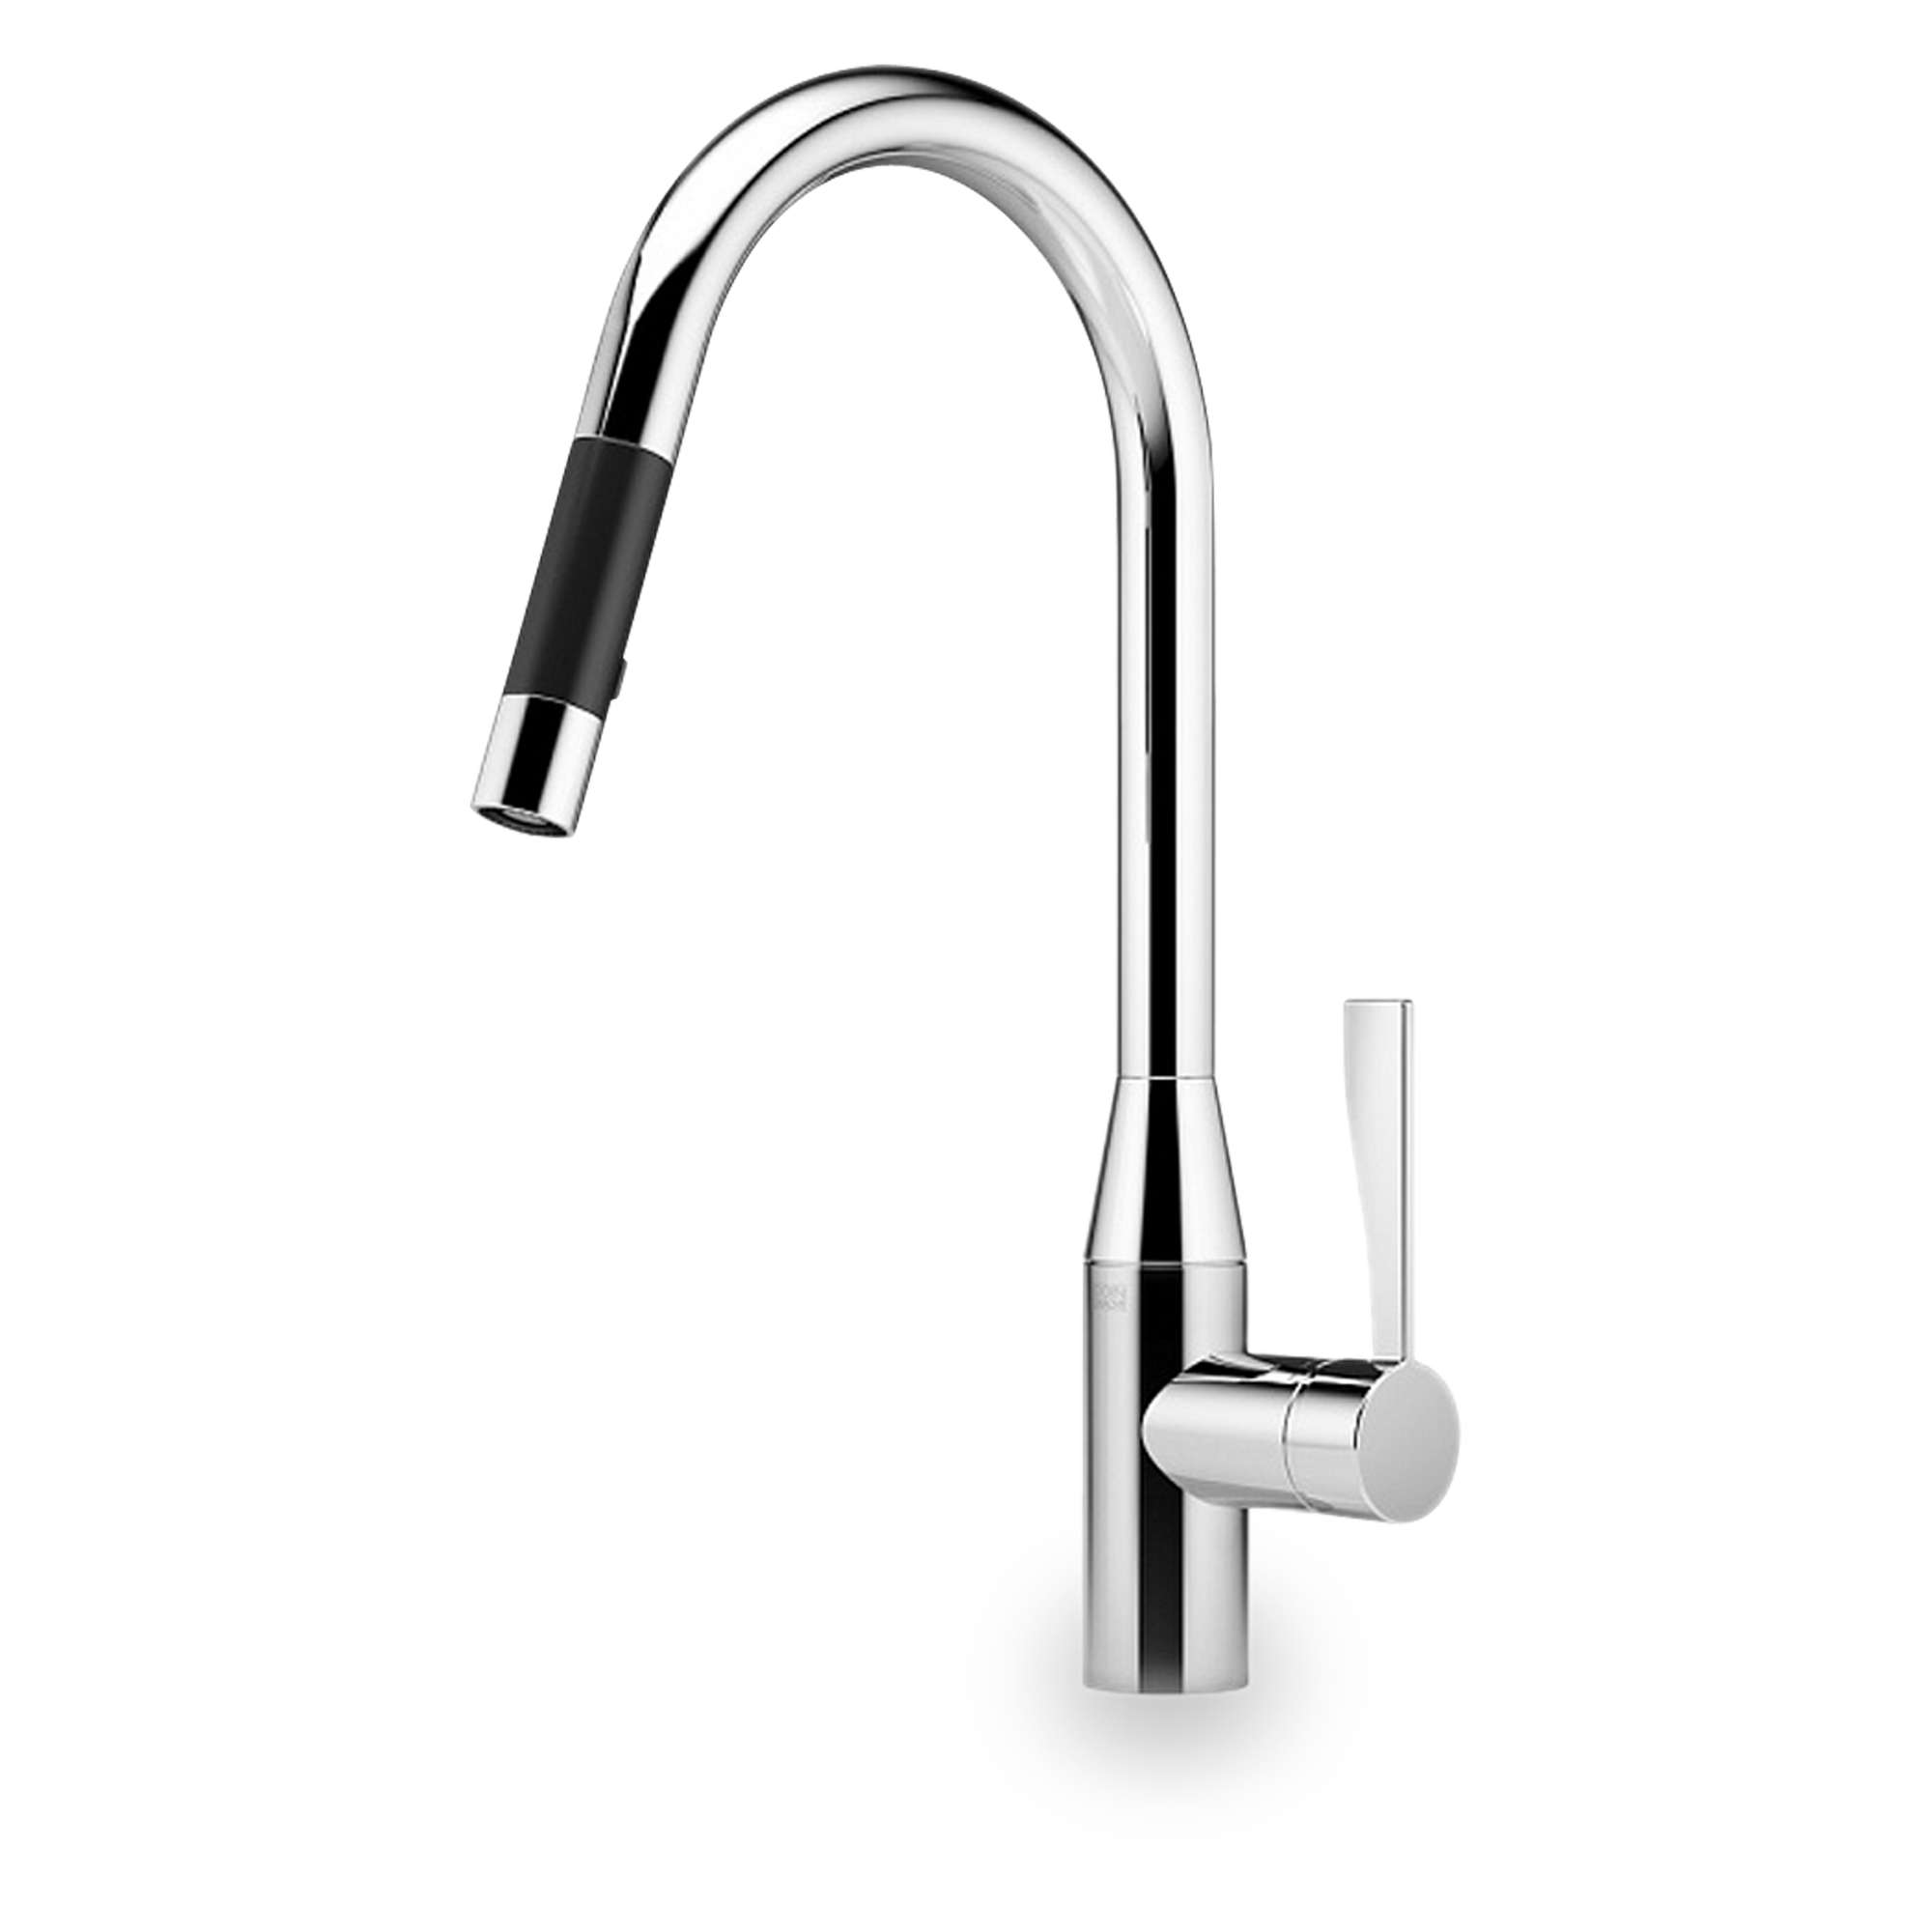 The Dornbracht Sync Faucet is a single-lever mixer pull-down with spray function.